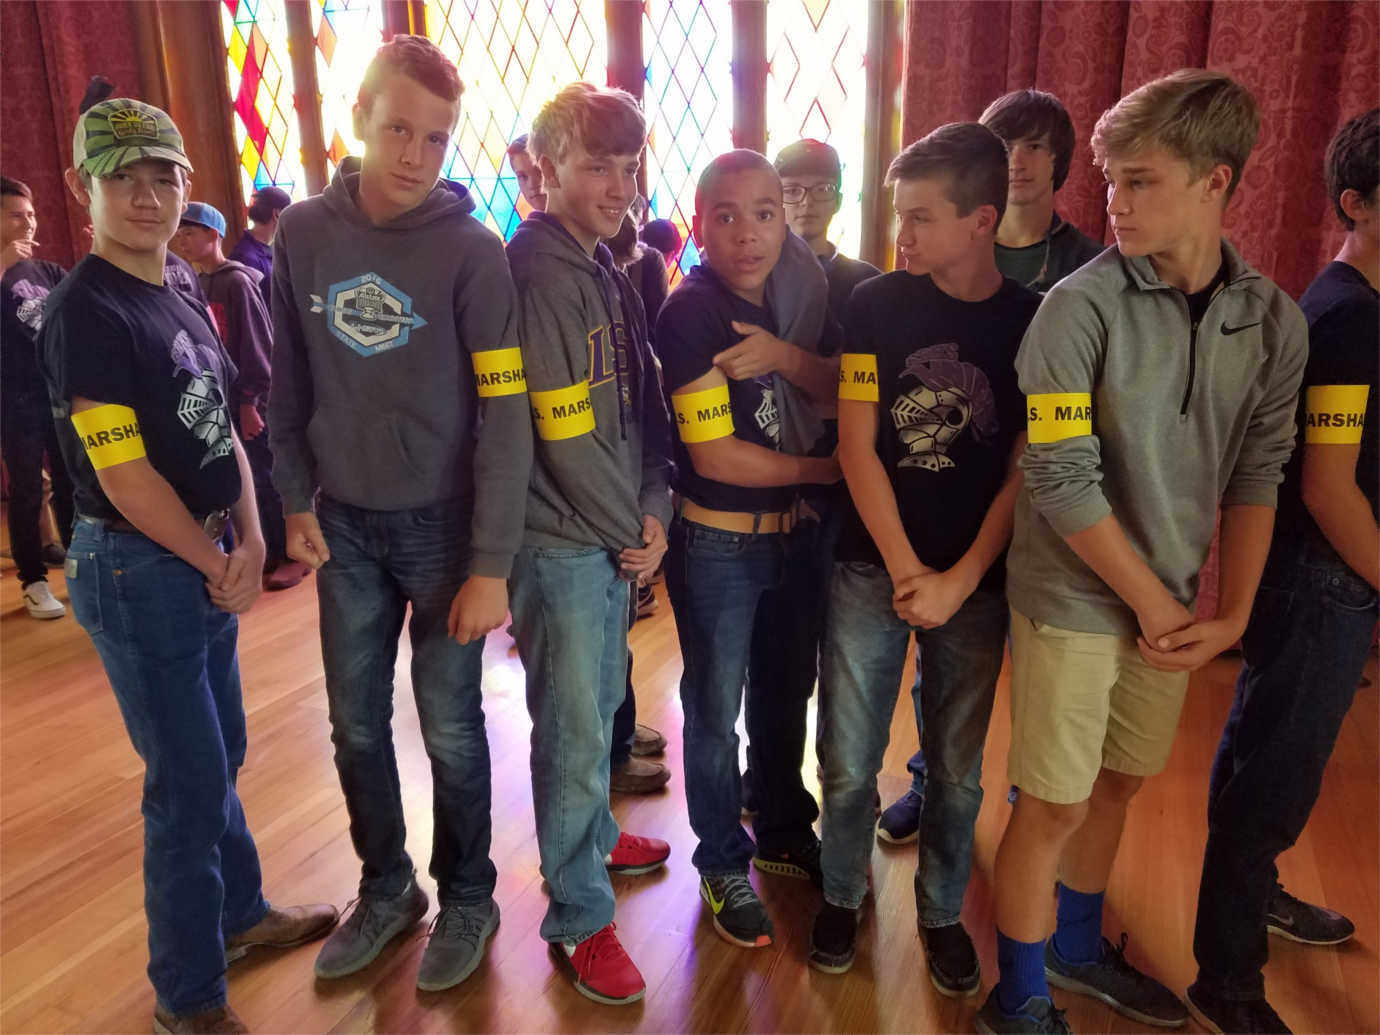 Students wear their own U.S. Marshal armbands after visiting *The Power of Children*, an exhibition developed by the Children's Museum of Indianapolis and adapted for smaller organizations by the Mid-America Arts Alliance. Image courtesy of the Mid-America Arts Alliance.